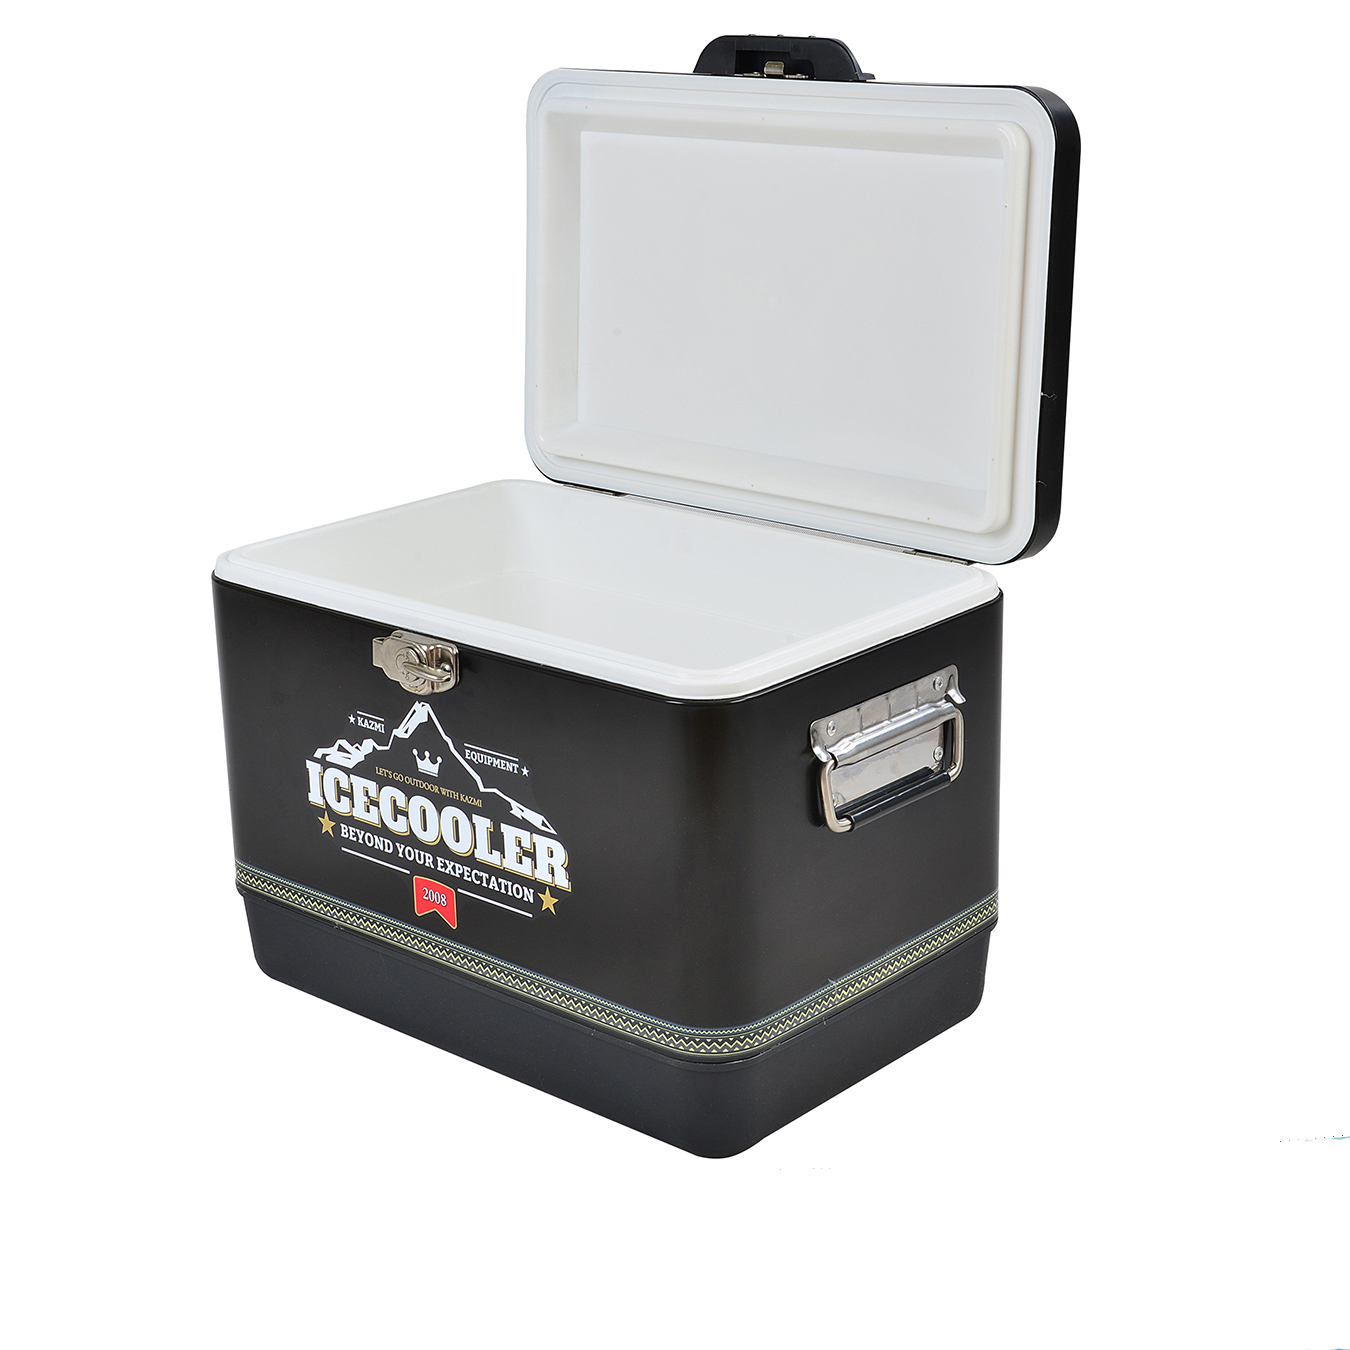 30L Insulate Beverage Cooler Box Metal Ice Cooler Box for Camping